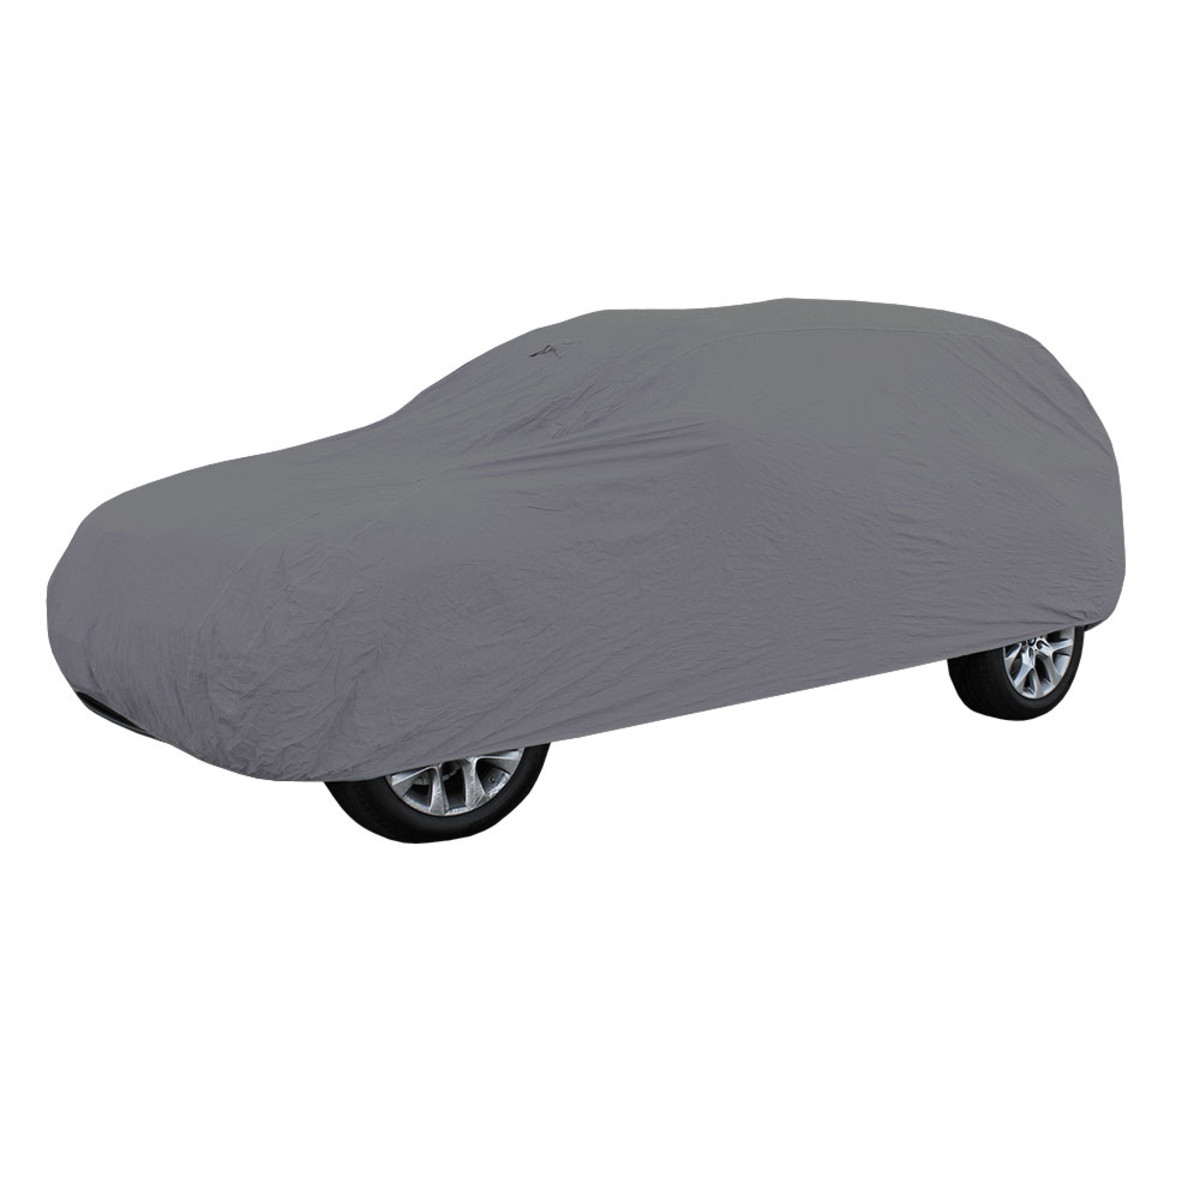 FH GROUP Non Woven Water Resistant SUV Car Cover and Storage bag with bonus Air Freshener - image 3 of 5